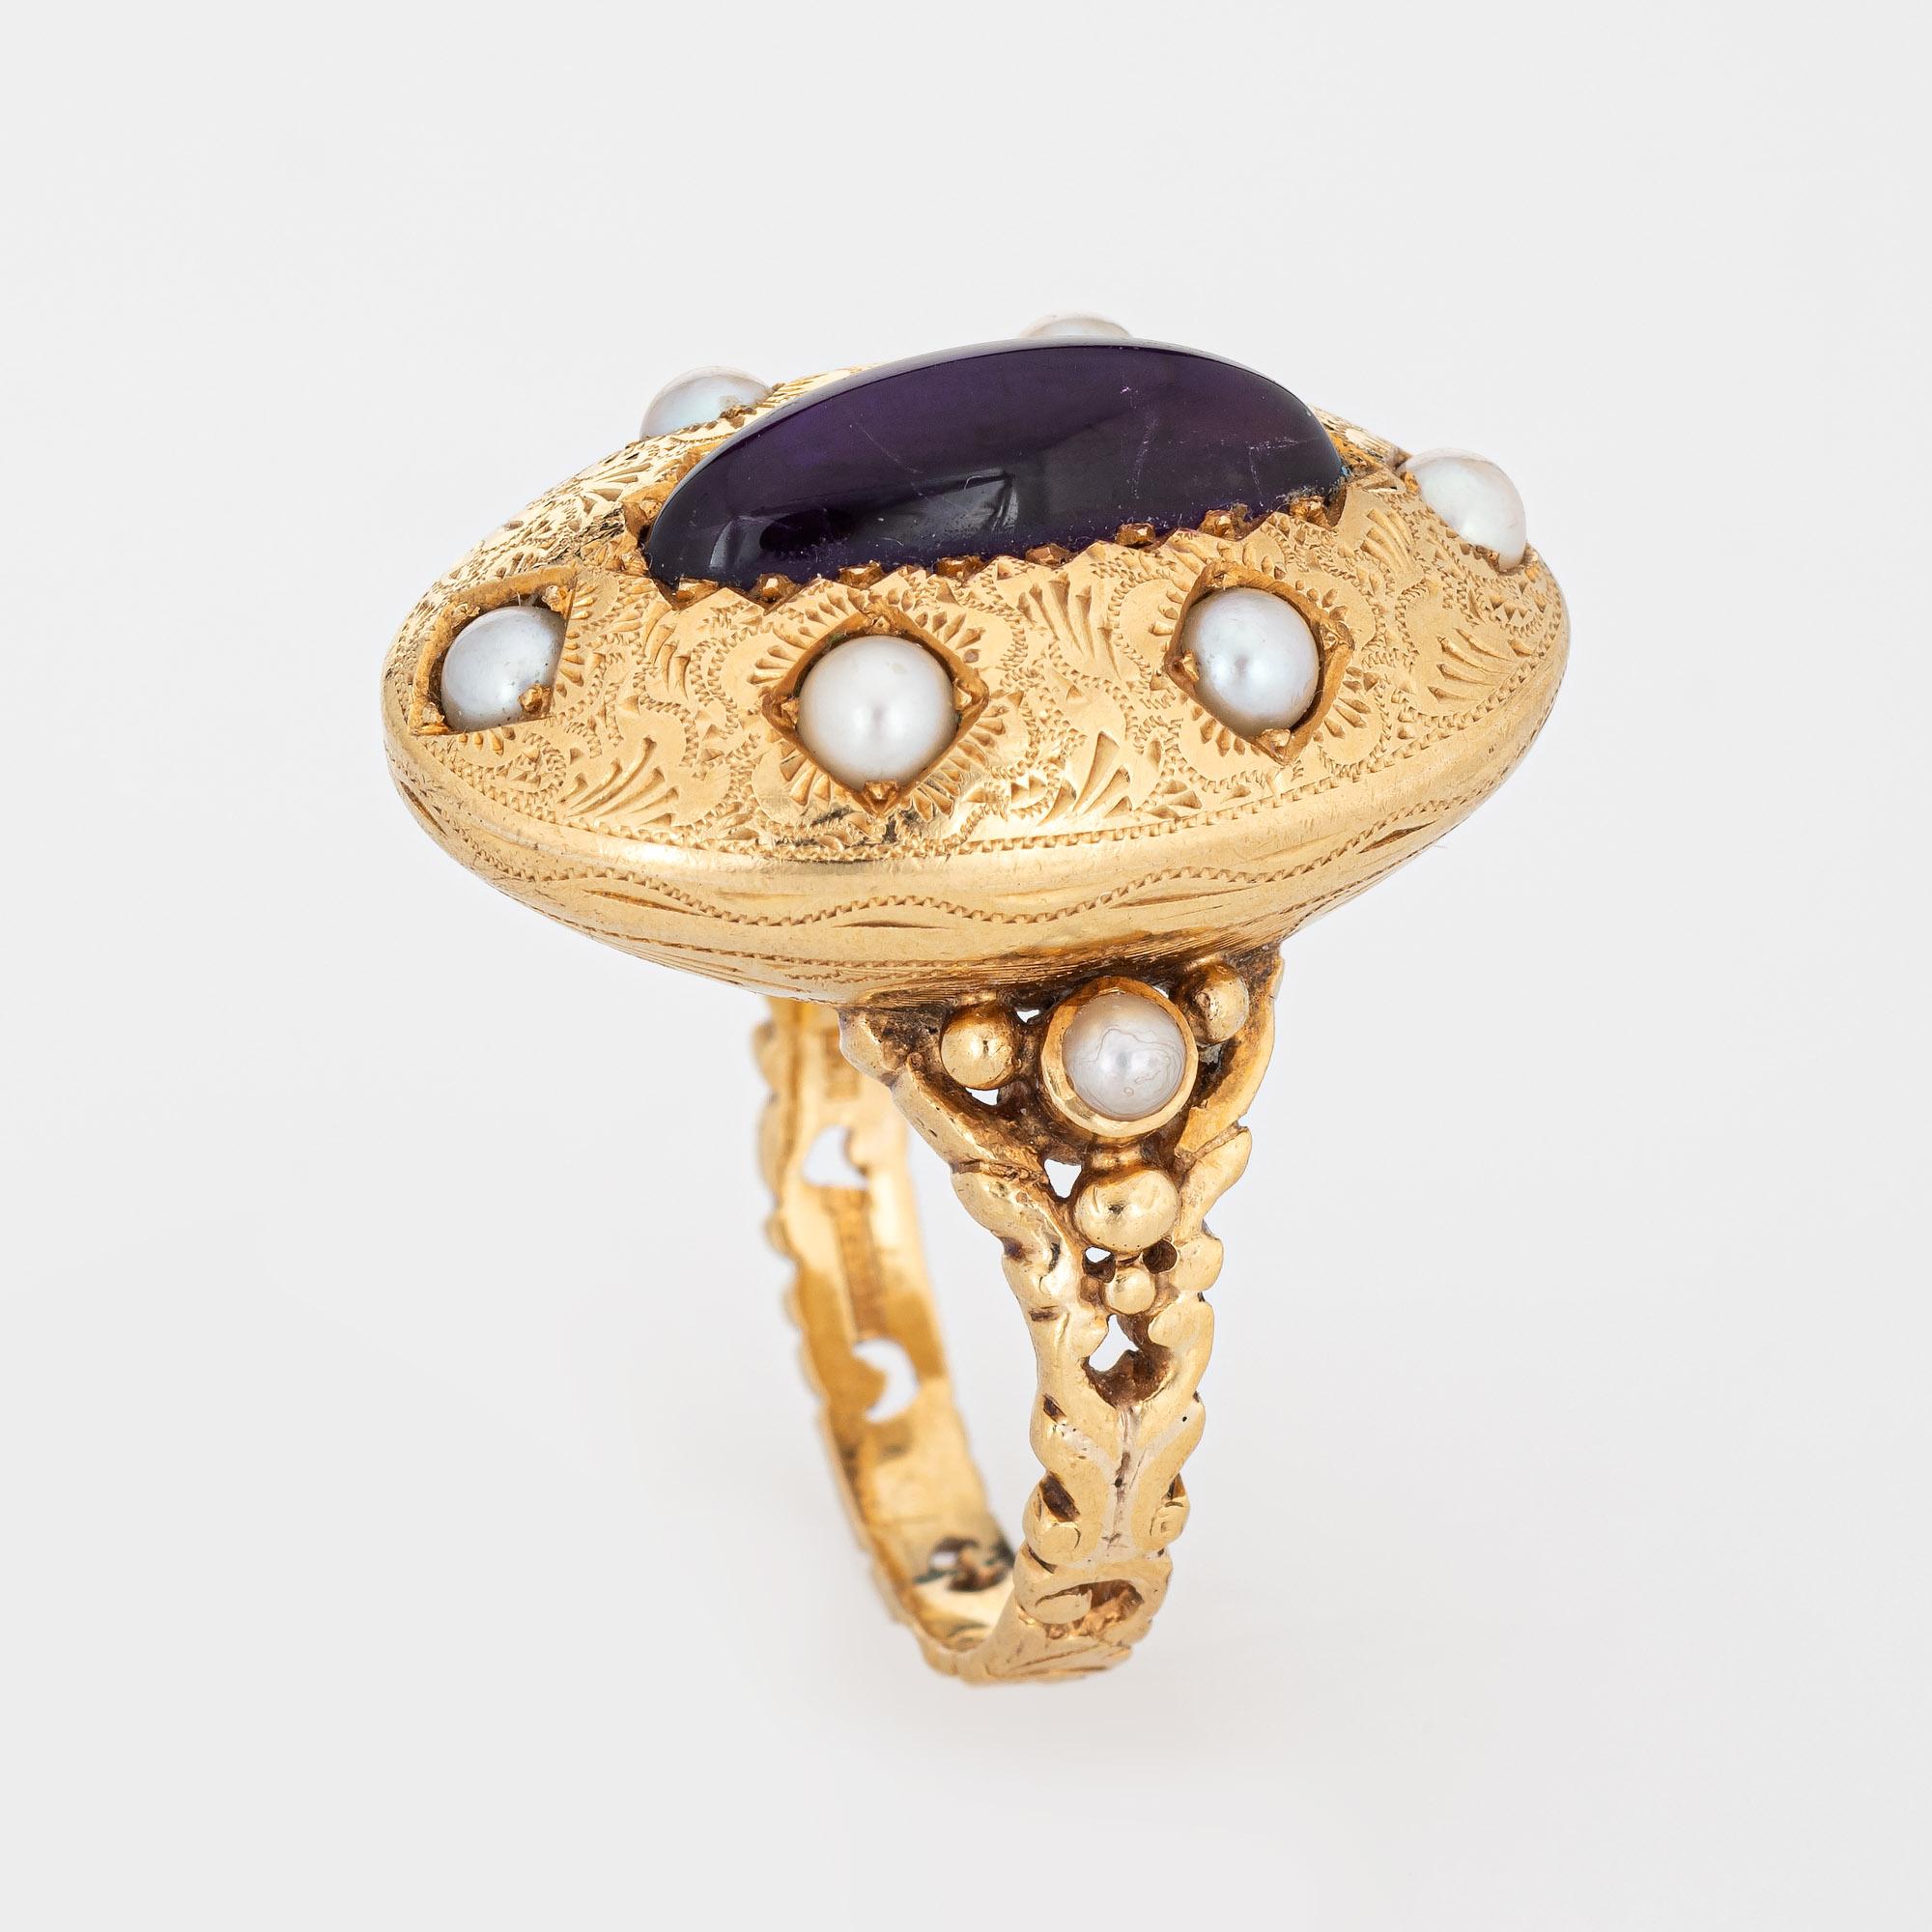 Stylish vintage amethyst & pearl cocktail ring crafted in 14 karat yellow gold. 

Cabochon cut amethyst measures 17mm x 6mm (estimated at 3.50 carats), accented with 8 x 3mm pearls. The amethyst is in very good condition and free or cracks or chips.